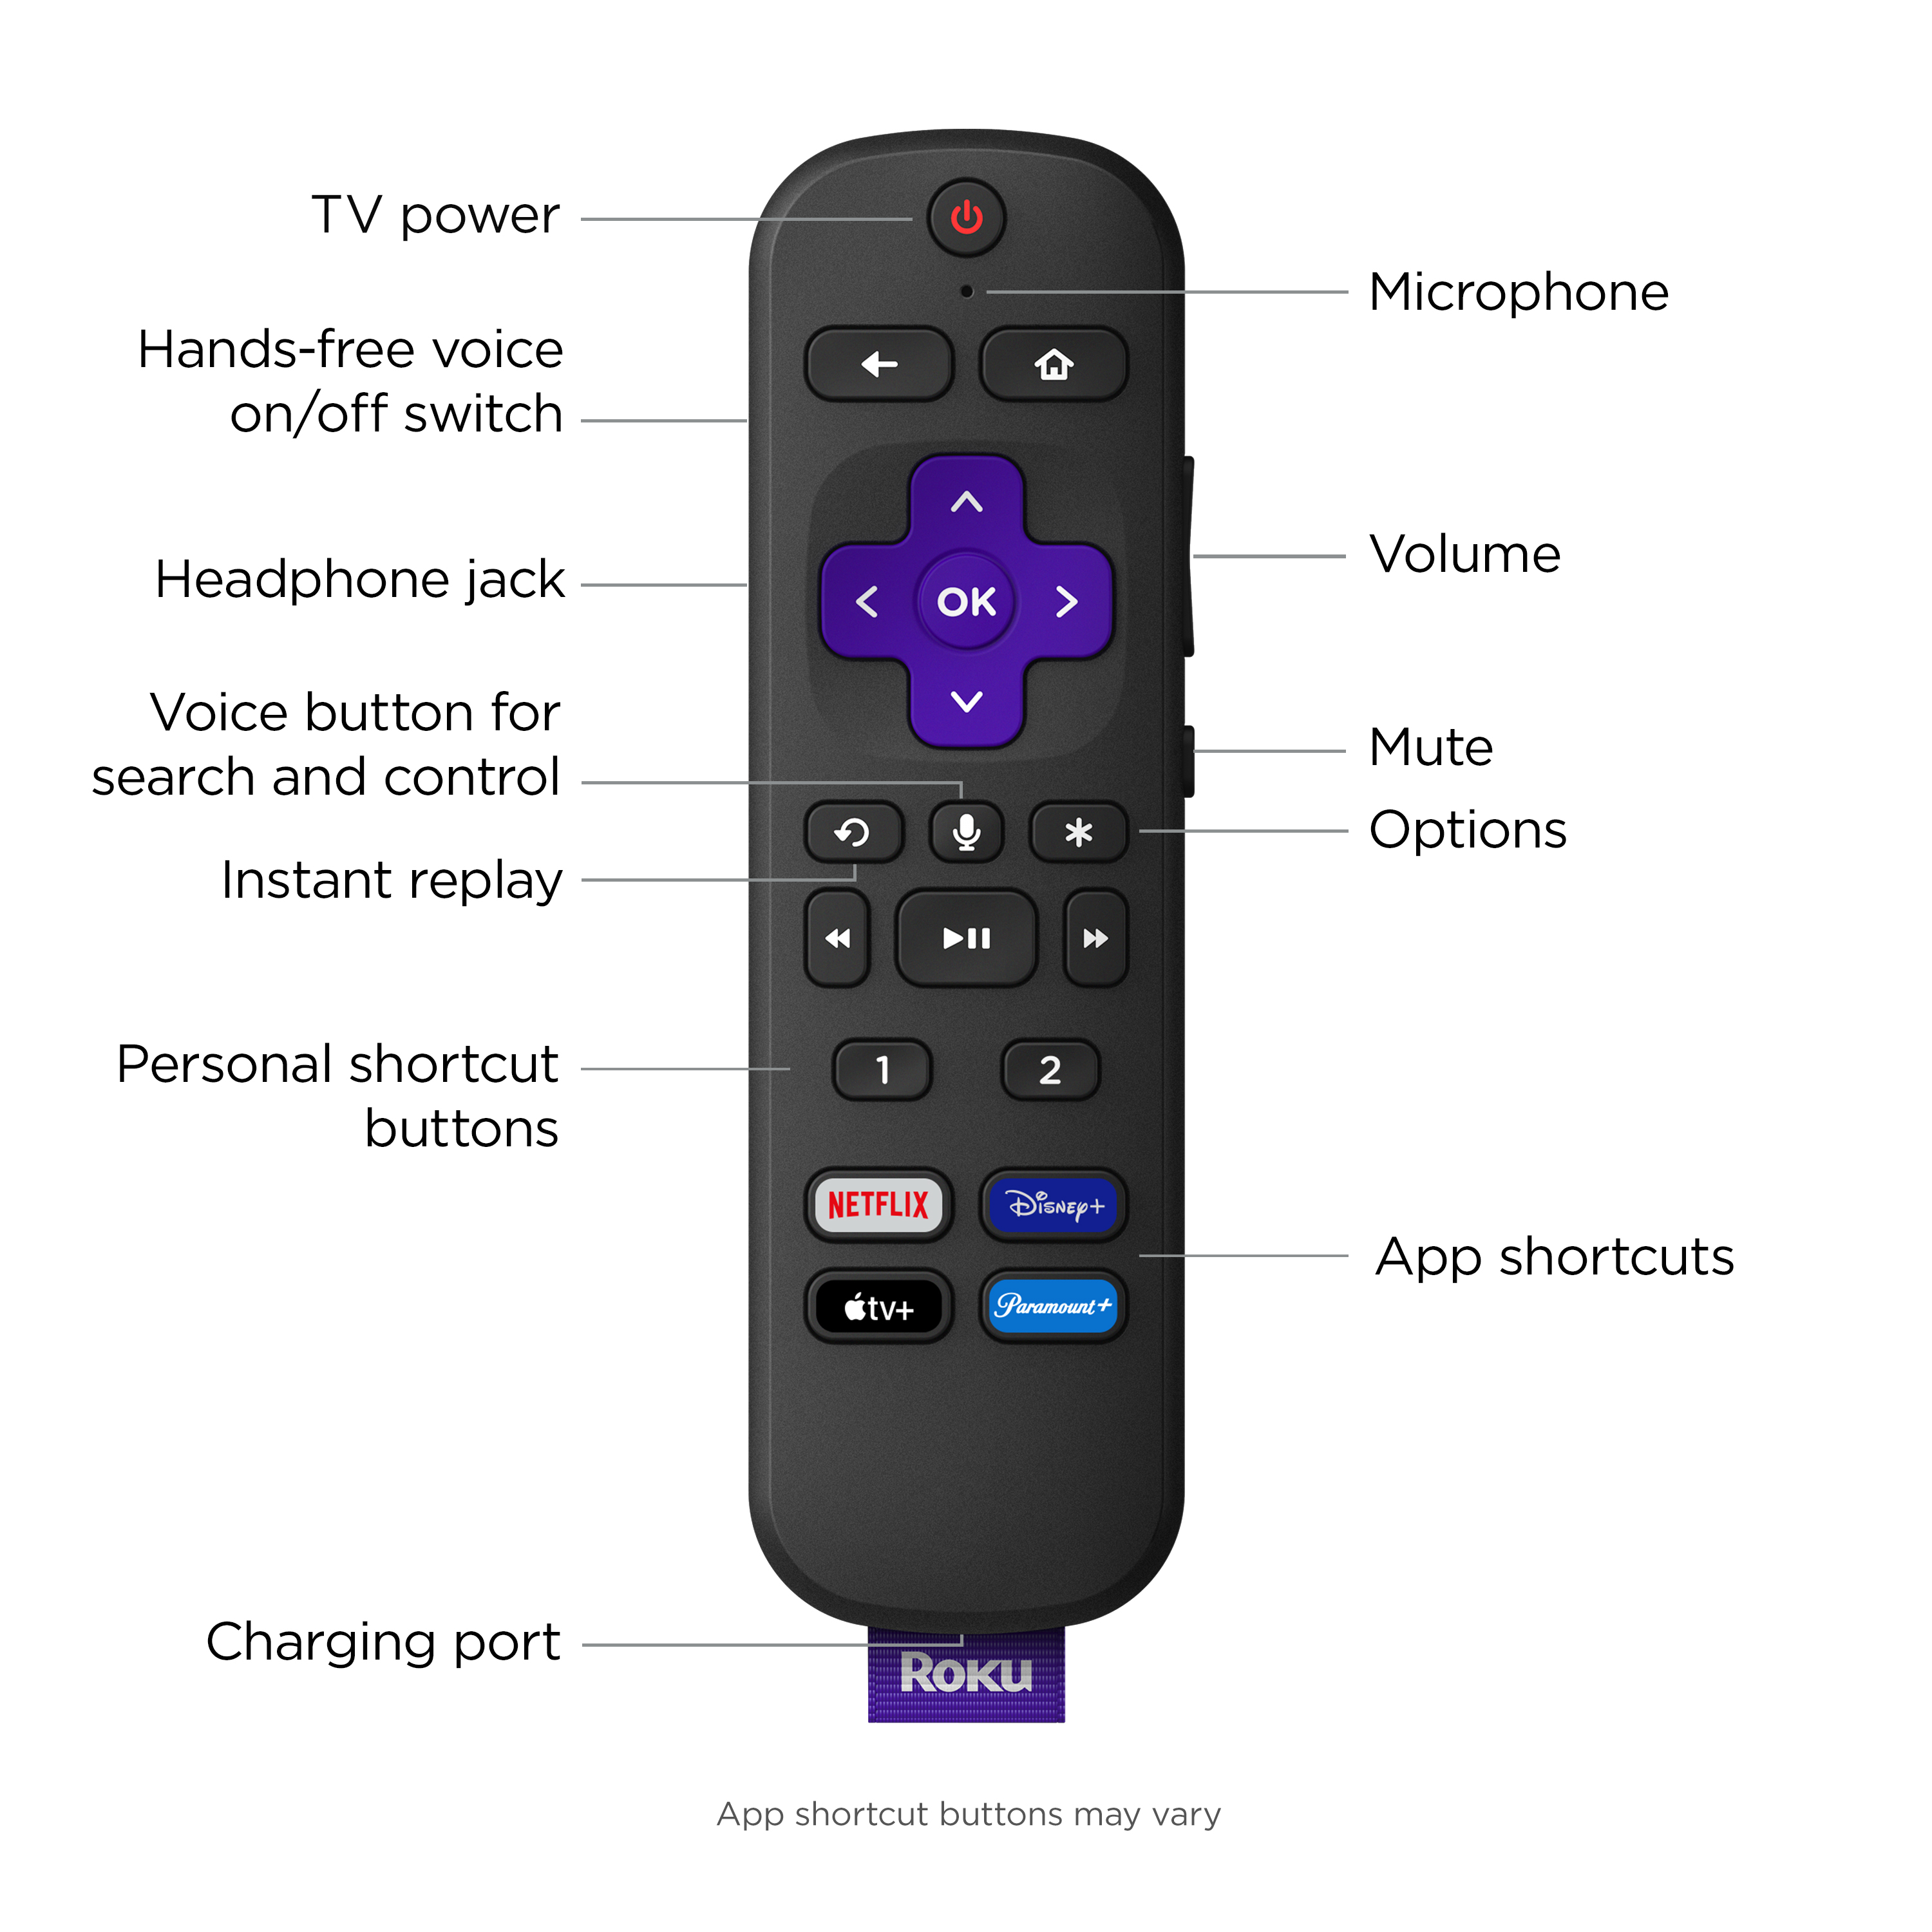 Roku Ultra, Our most powerful streaming device